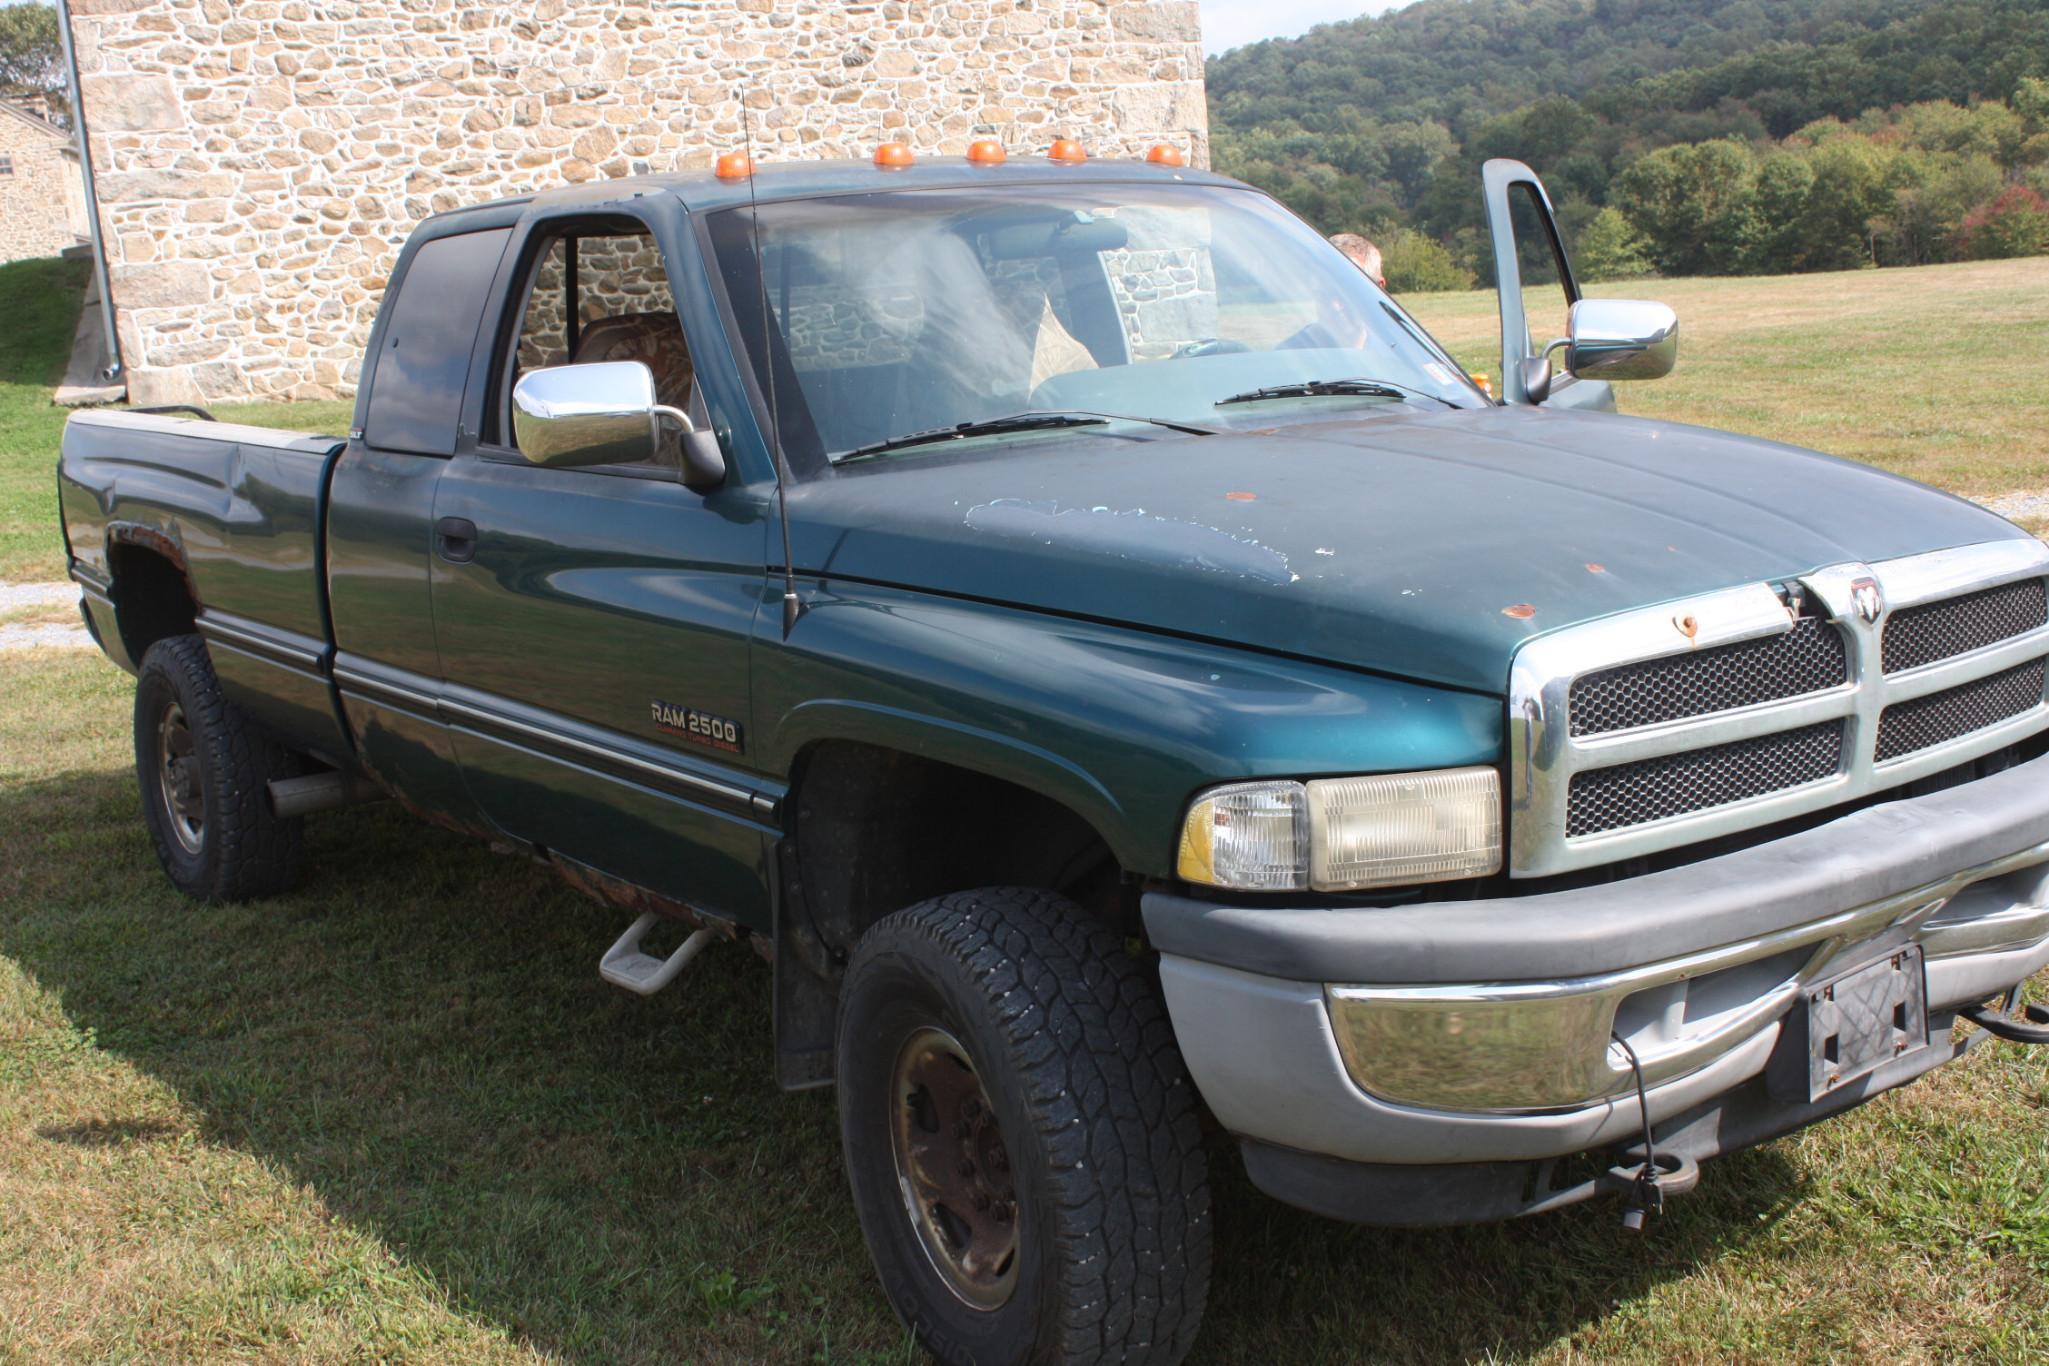 1999 Dodge extended cab, 250 Diesel 4X4 auto, rusty but runs and drives.